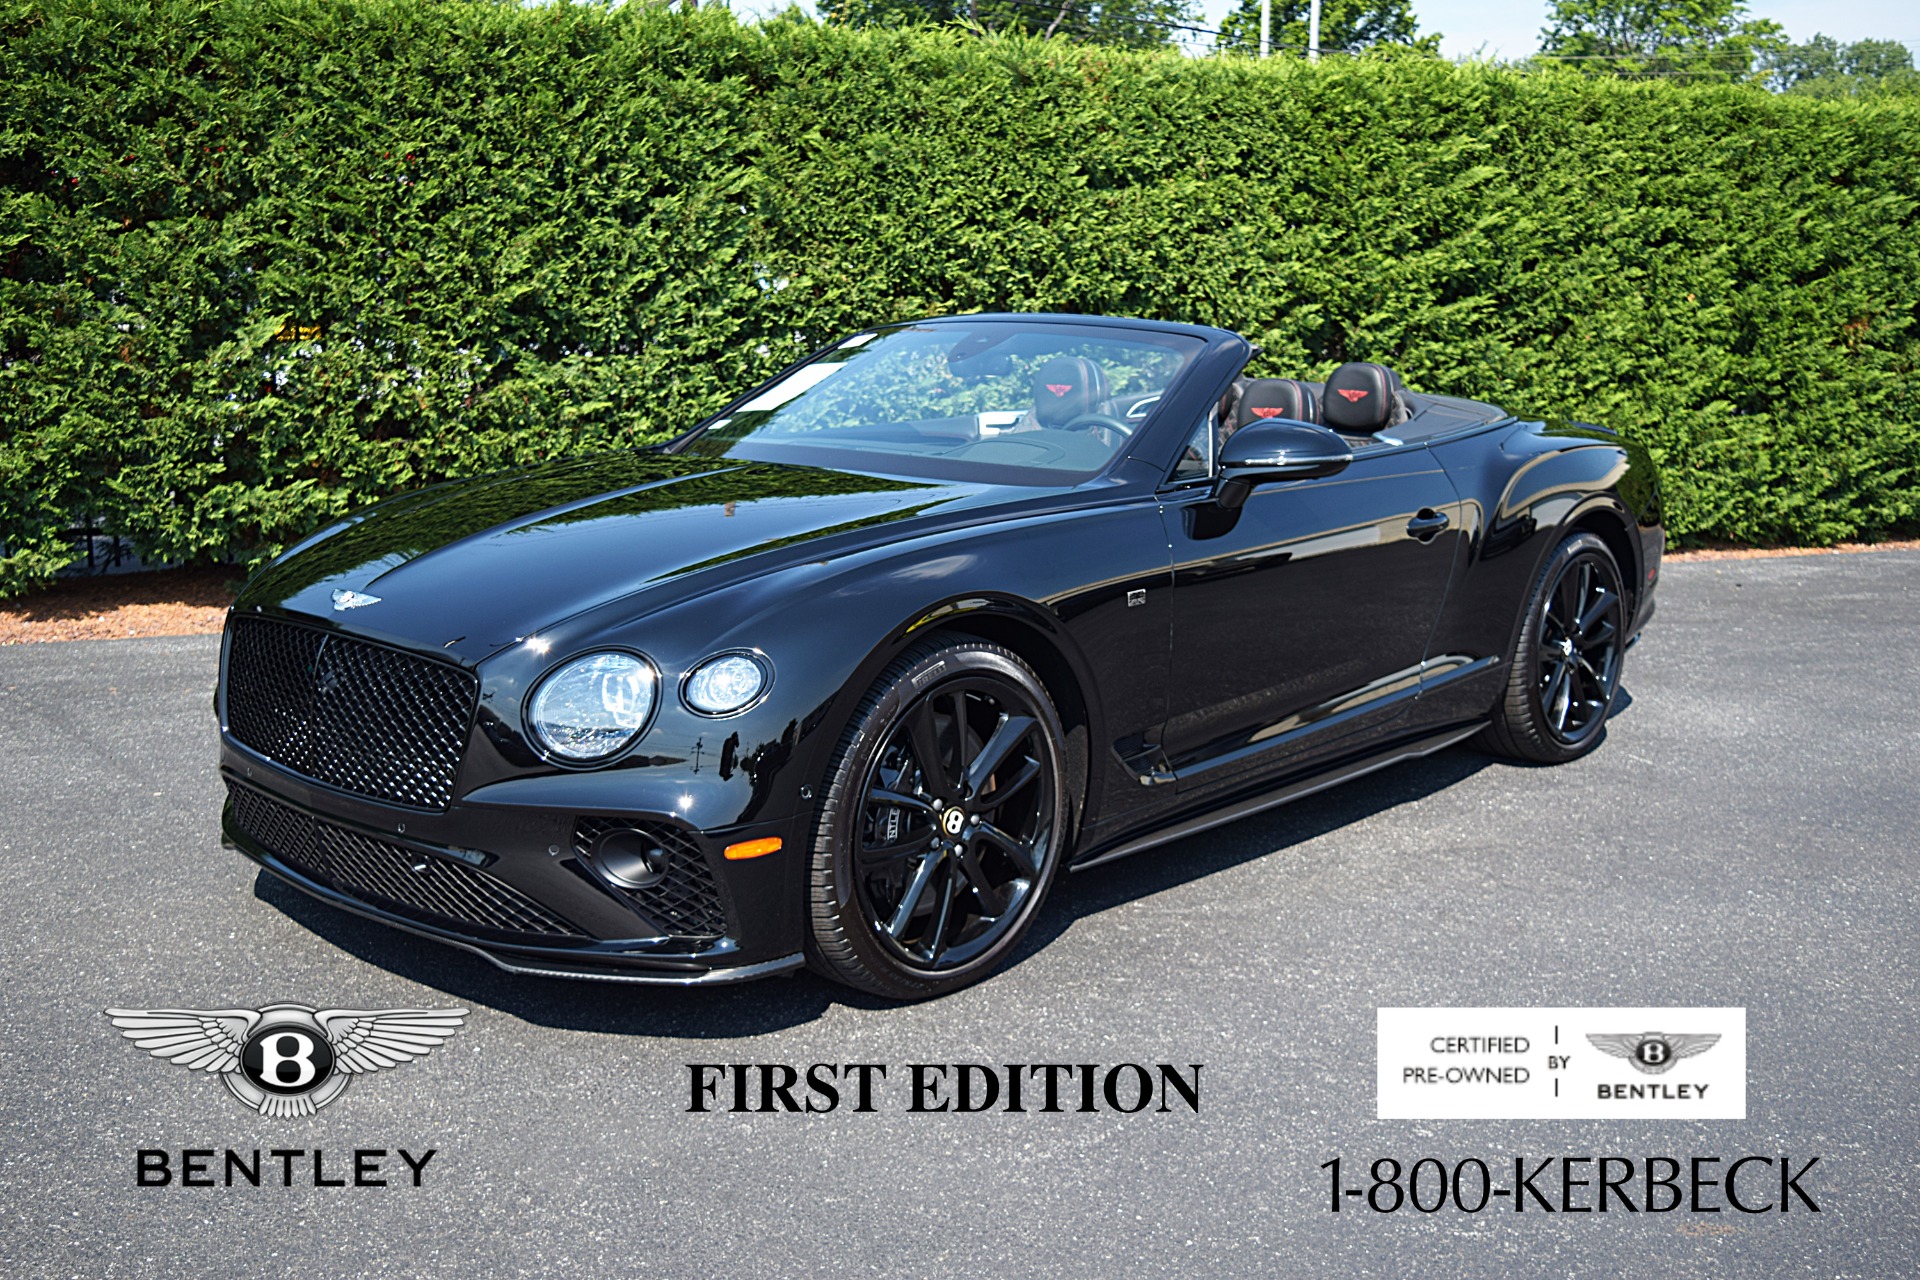 Used 2020 Bentley Continental GT V8 First Edition for sale Sold at Bentley Palmyra N.J. in Palmyra NJ 08065 2